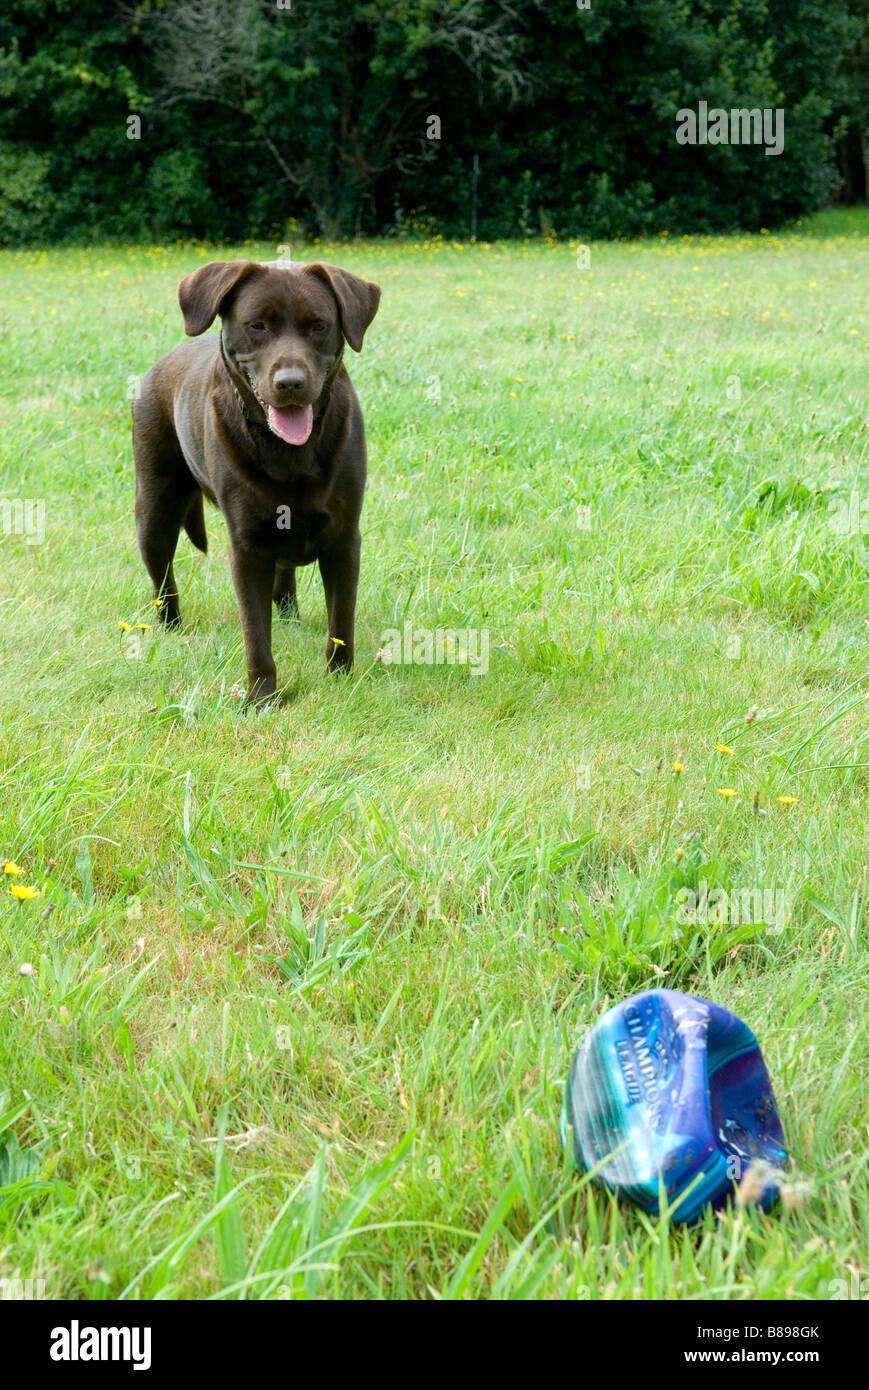 Dog playing with punctured football Stock Photo